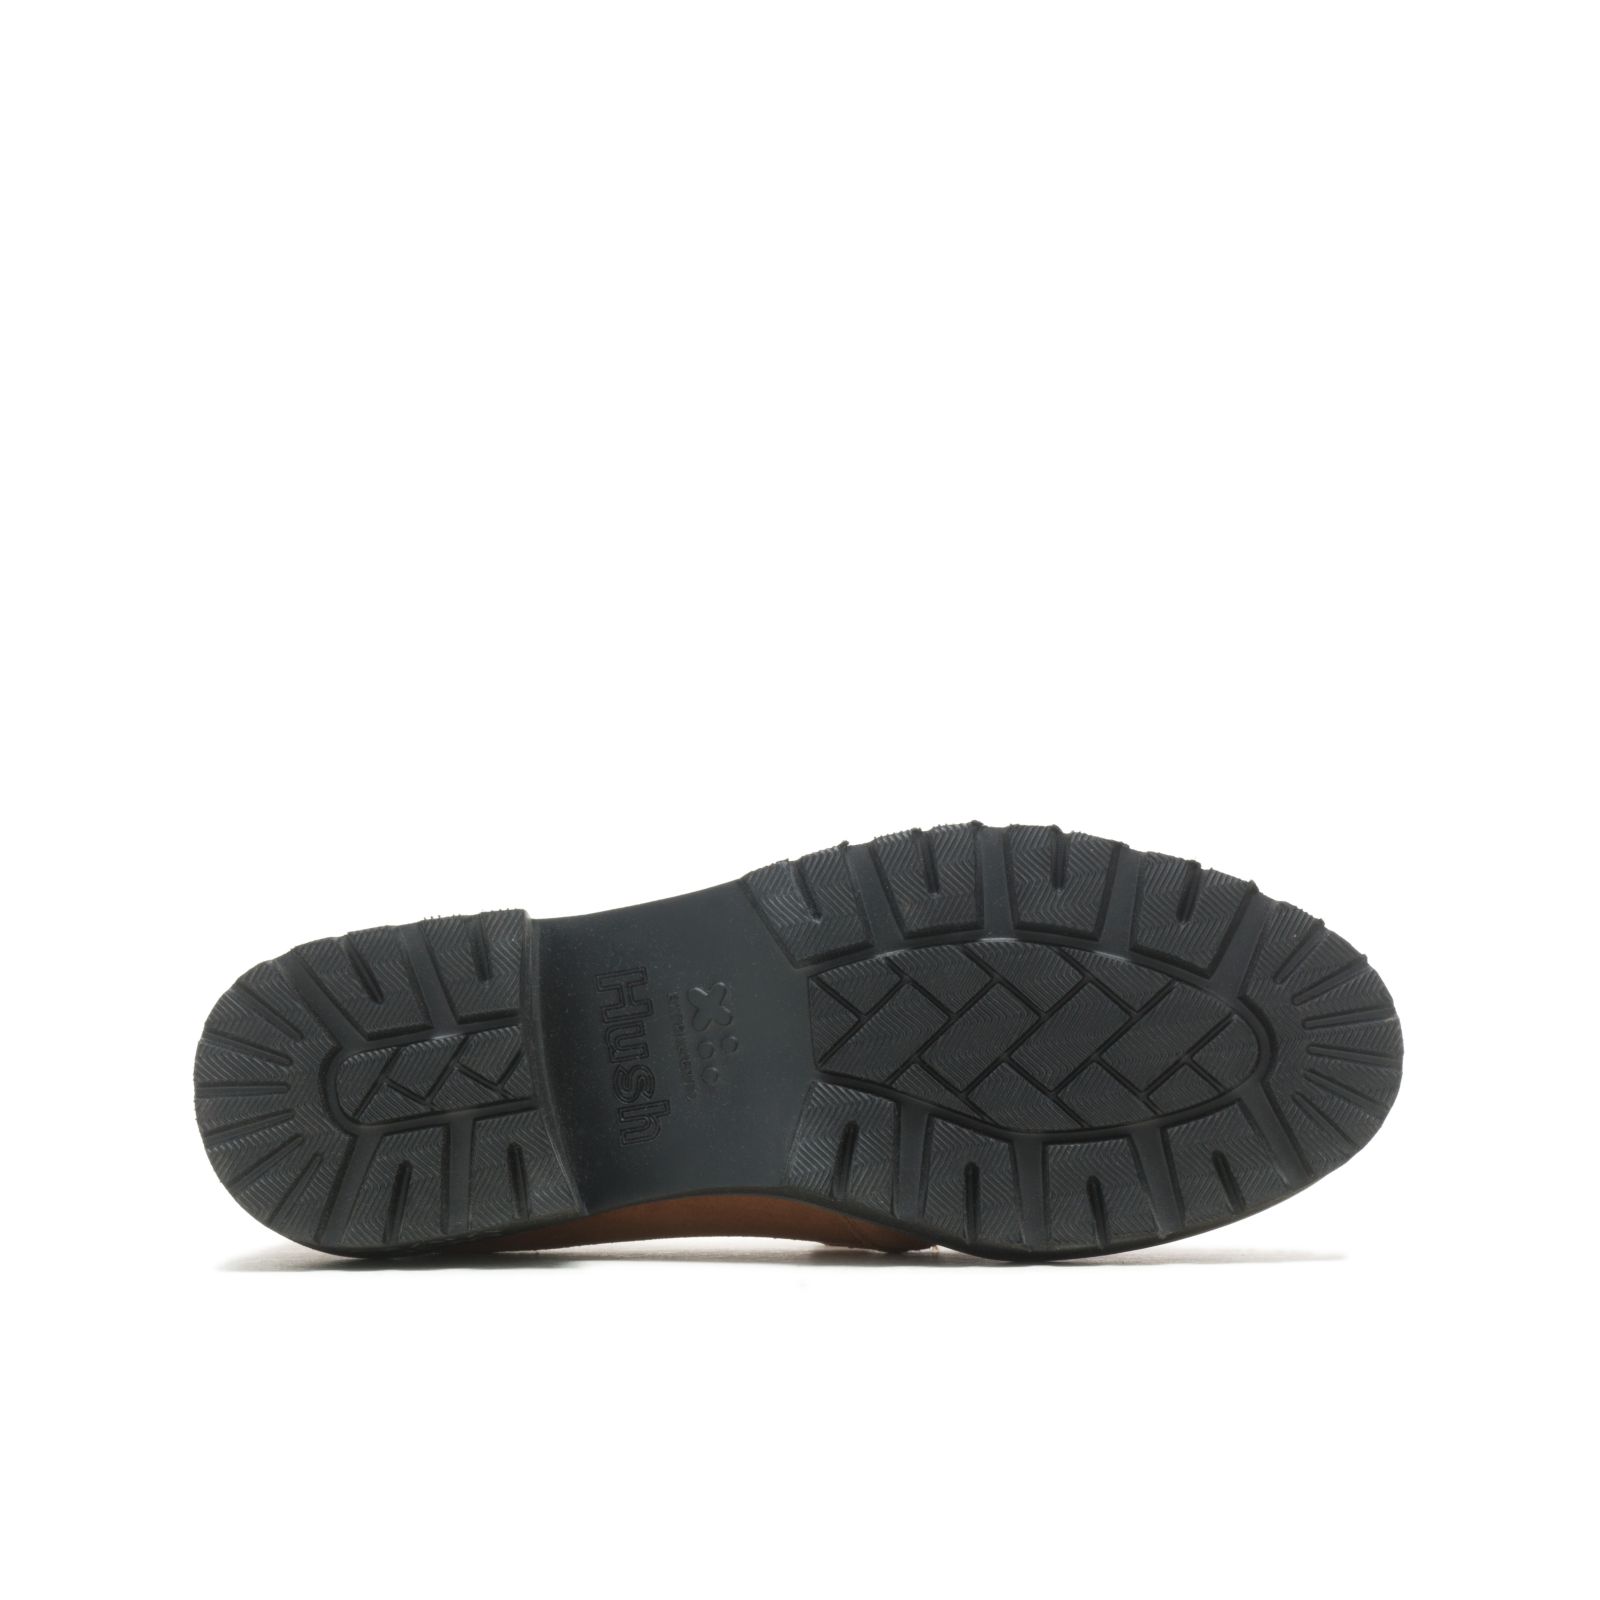 Loafers Hush Puppies Lucy Mujer Marrom Oscuro | VTOLFBP-50